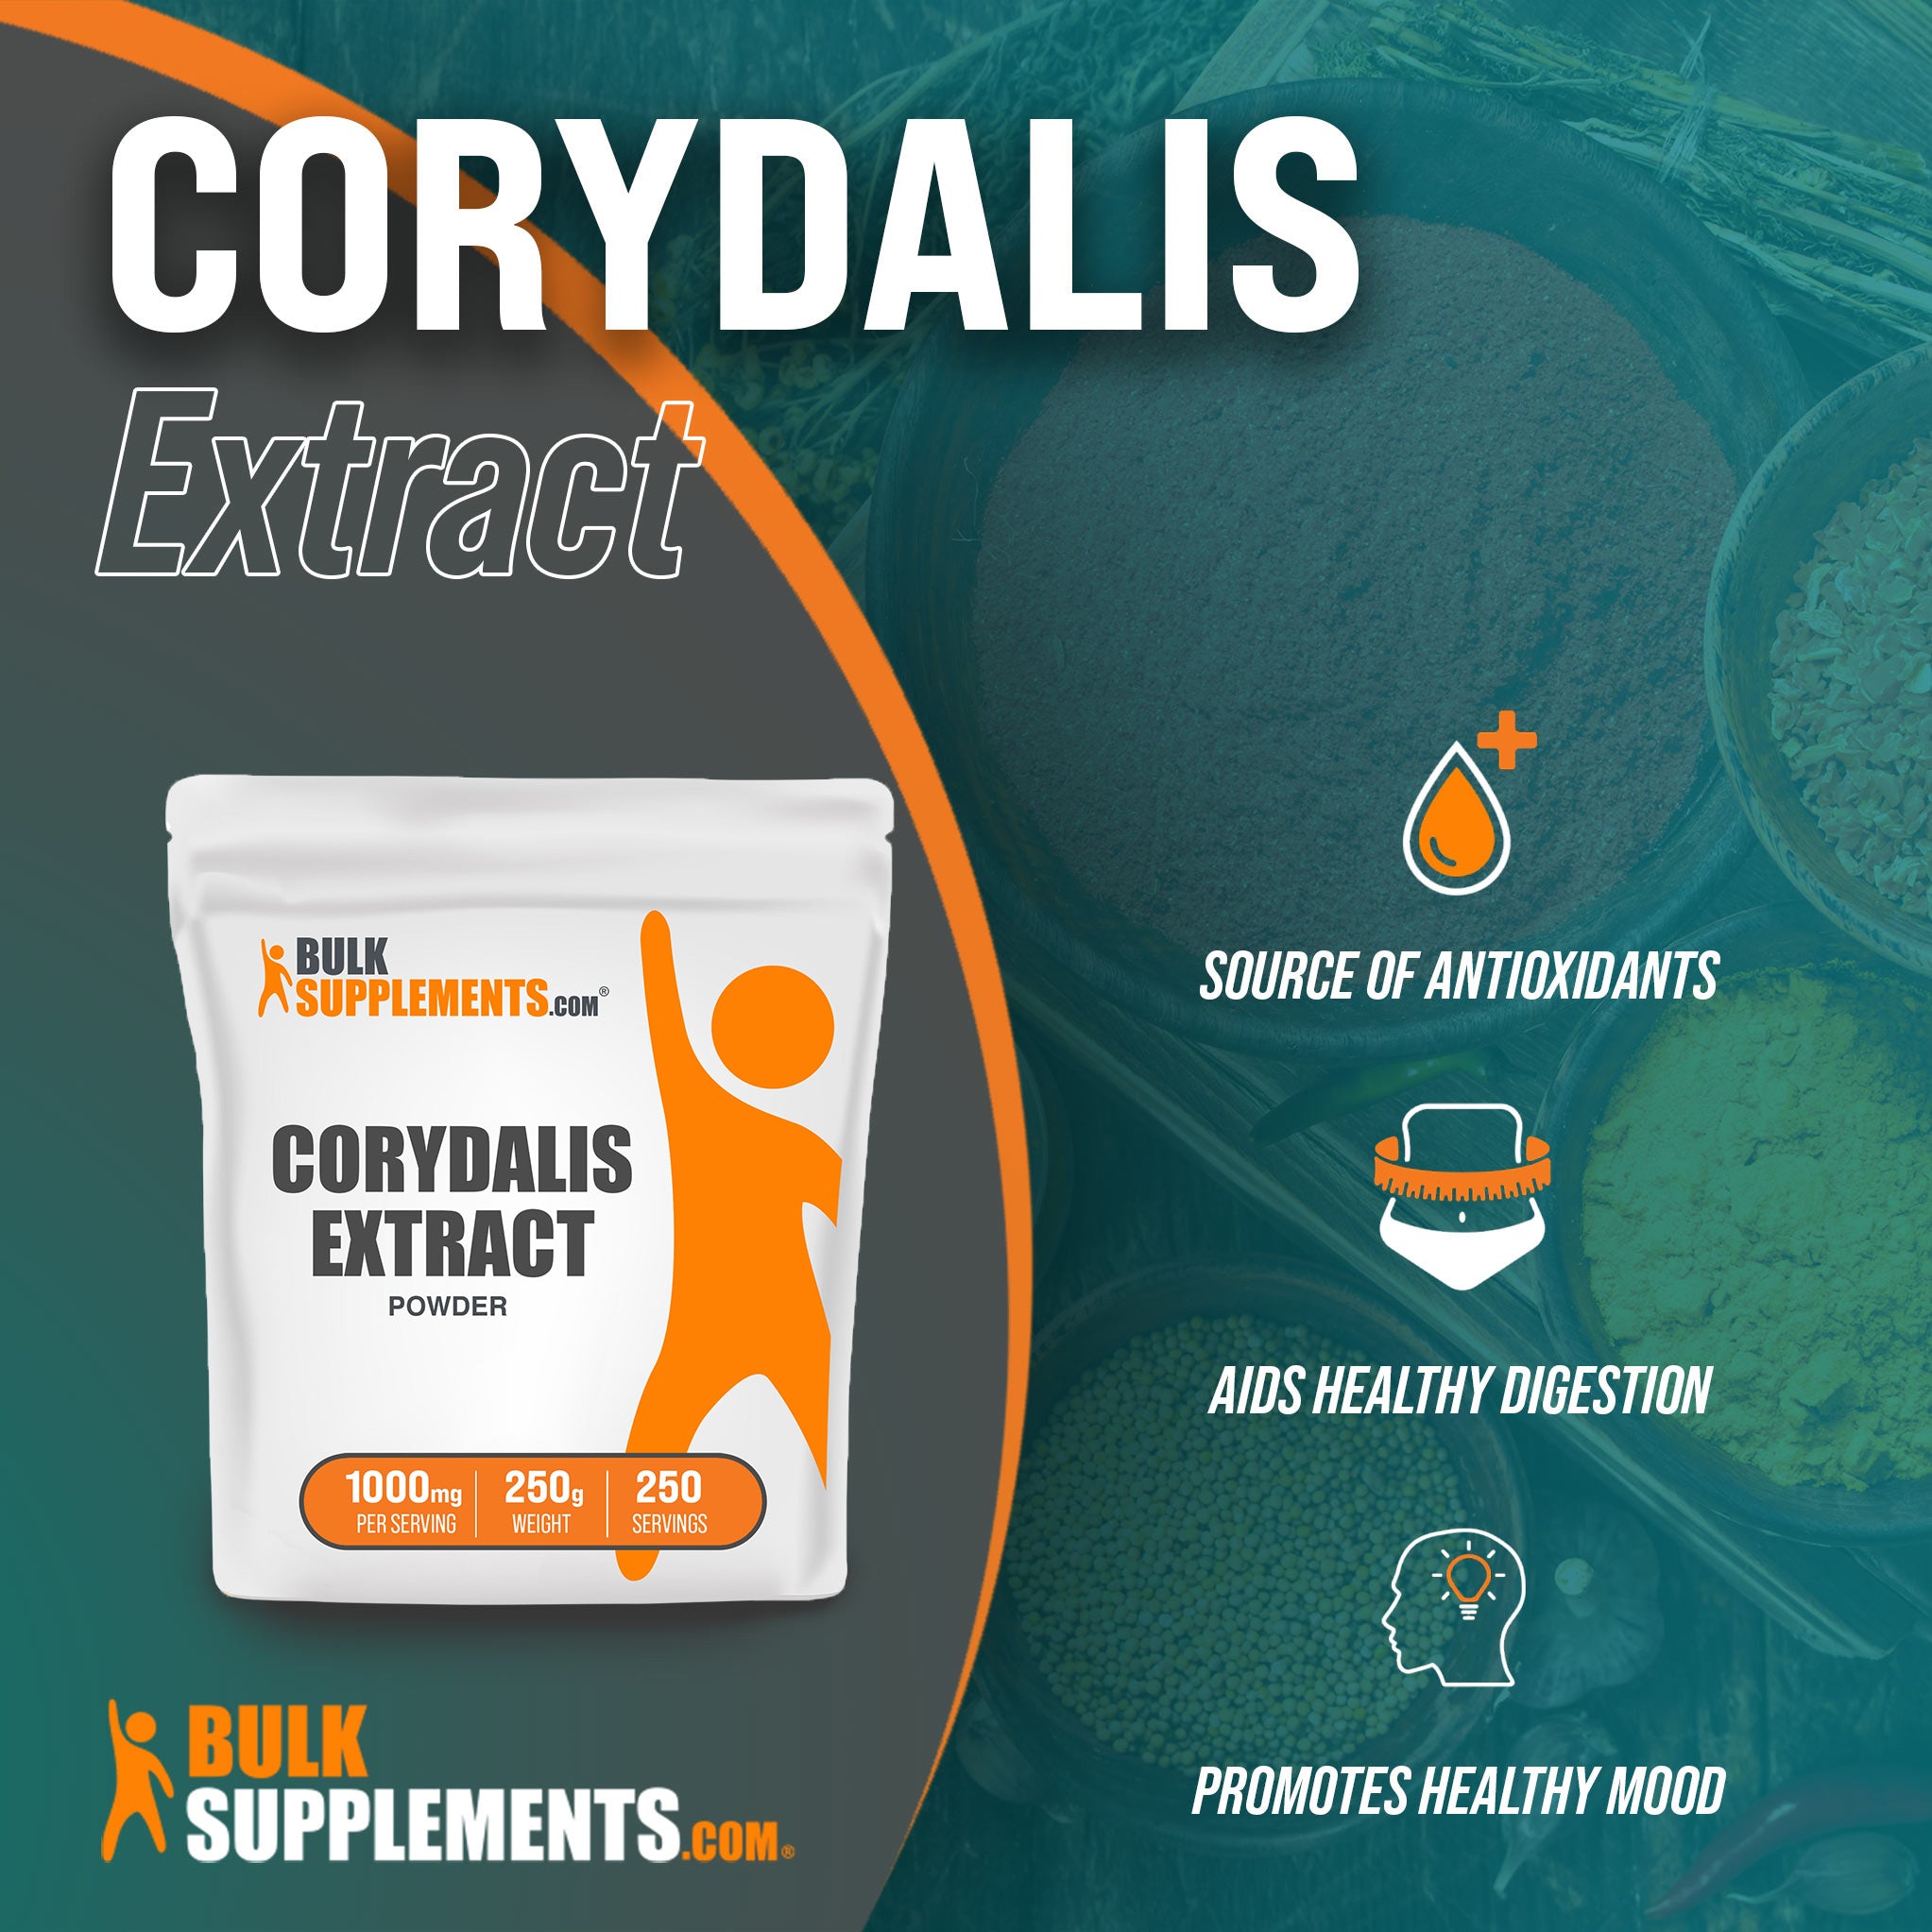 Benefits of Corydalis Extract; source of antioxidants, aids healthy digestion, promotes healthy mood